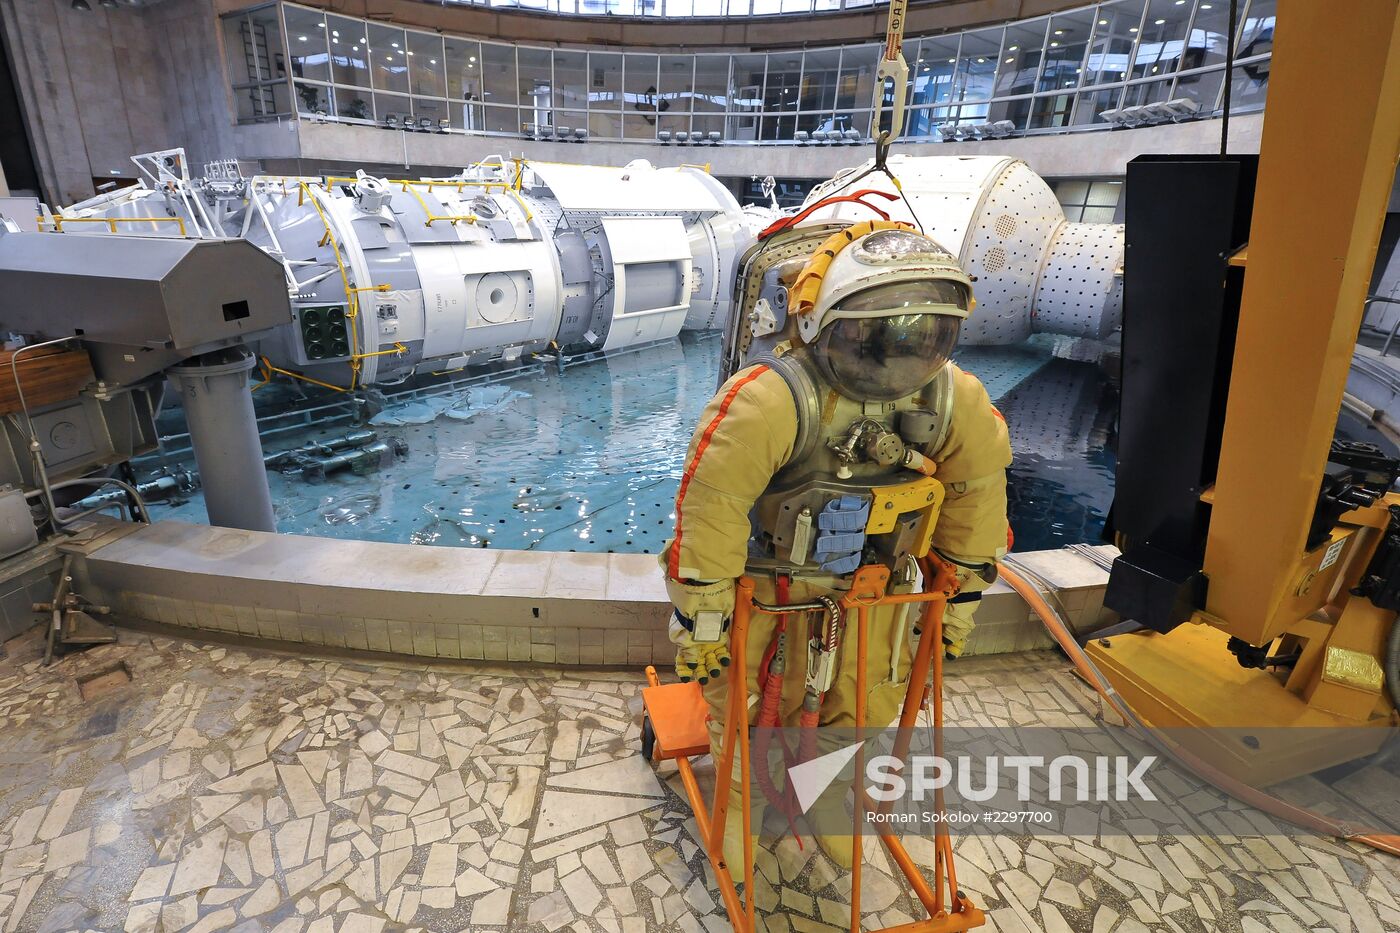 Cosmonaut training for a mission to ISS